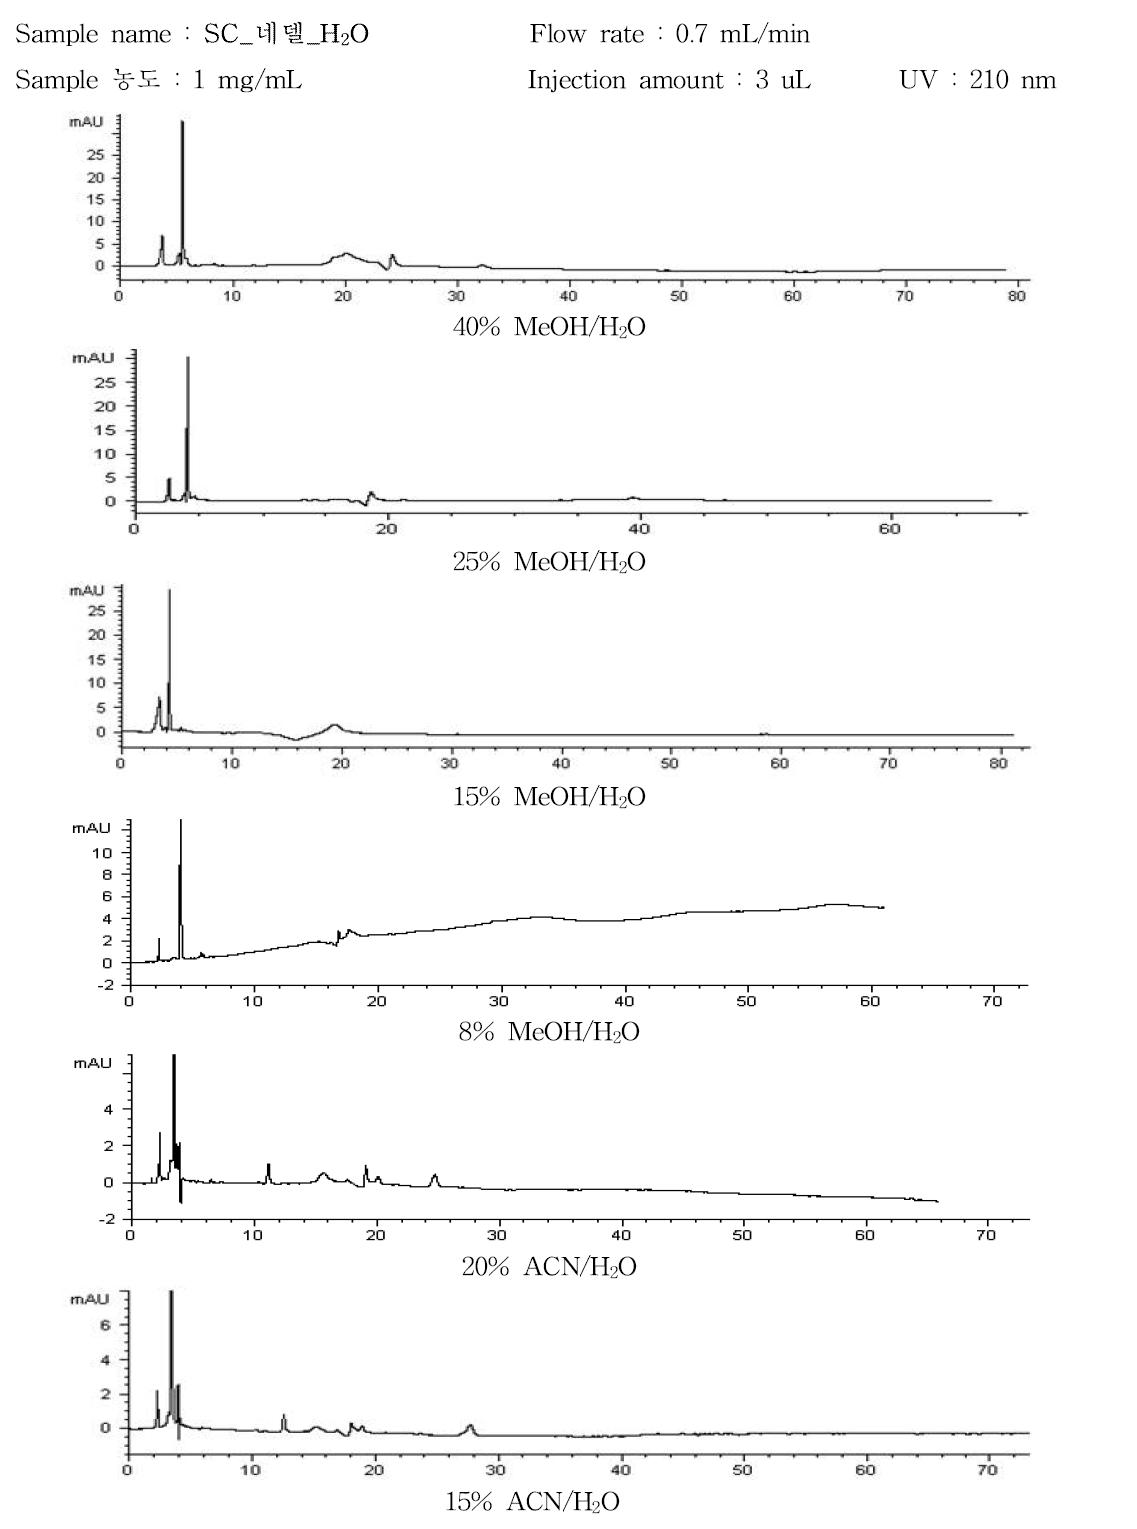 HPLC chromatograms of SC_네델_H2O with MeOH/H2O and ACN/H2O mobile phase, respectively.